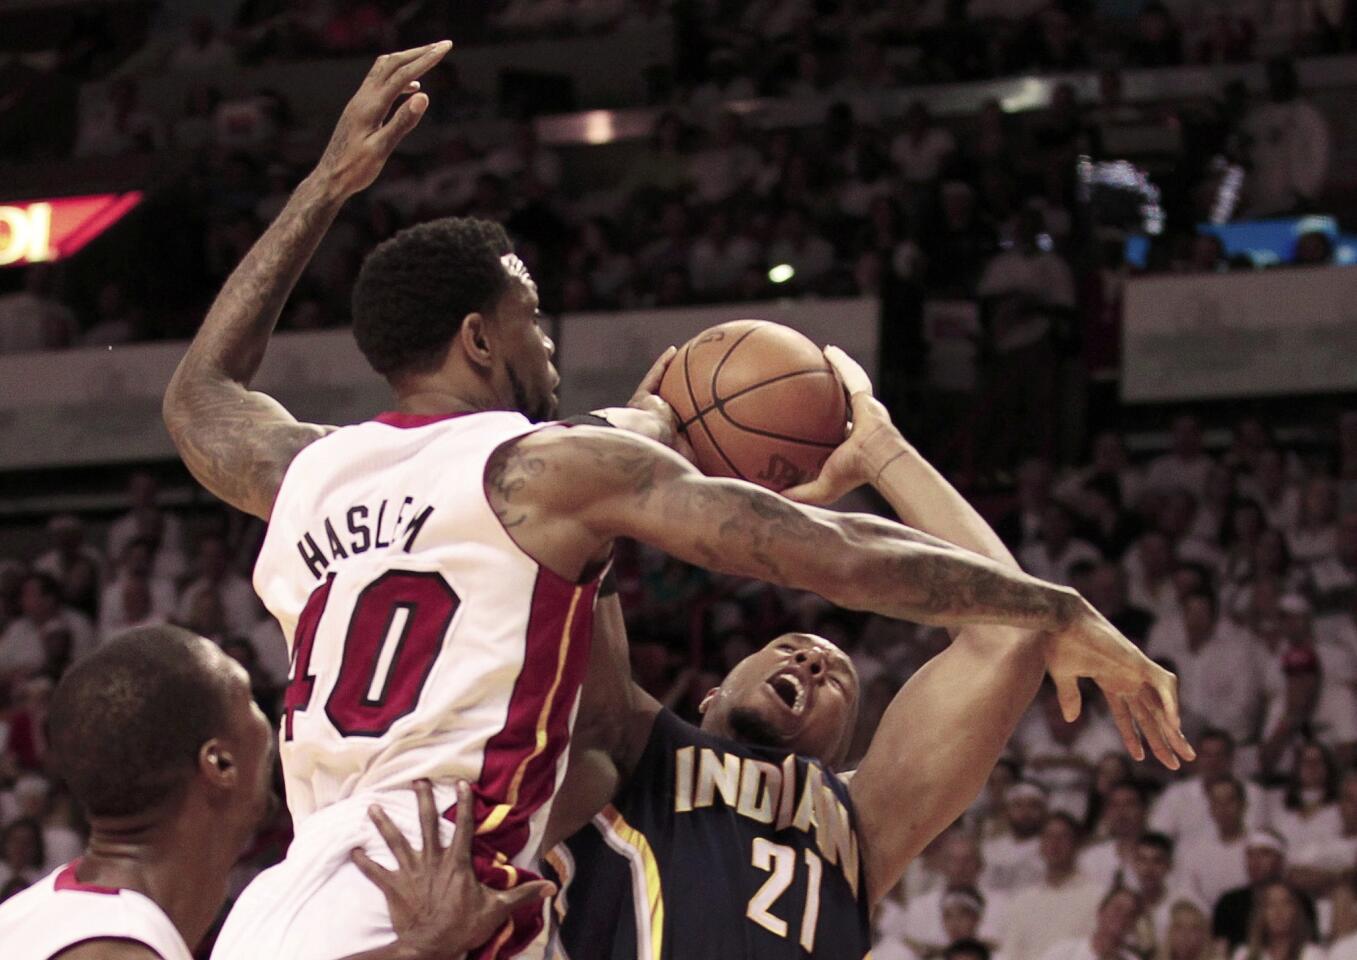 Miami Heat's Haslem fouls Indiana Pacers' West during the first quarter in Game 1 of their NBA Eastern Conference second round basketball playoff series in Miami